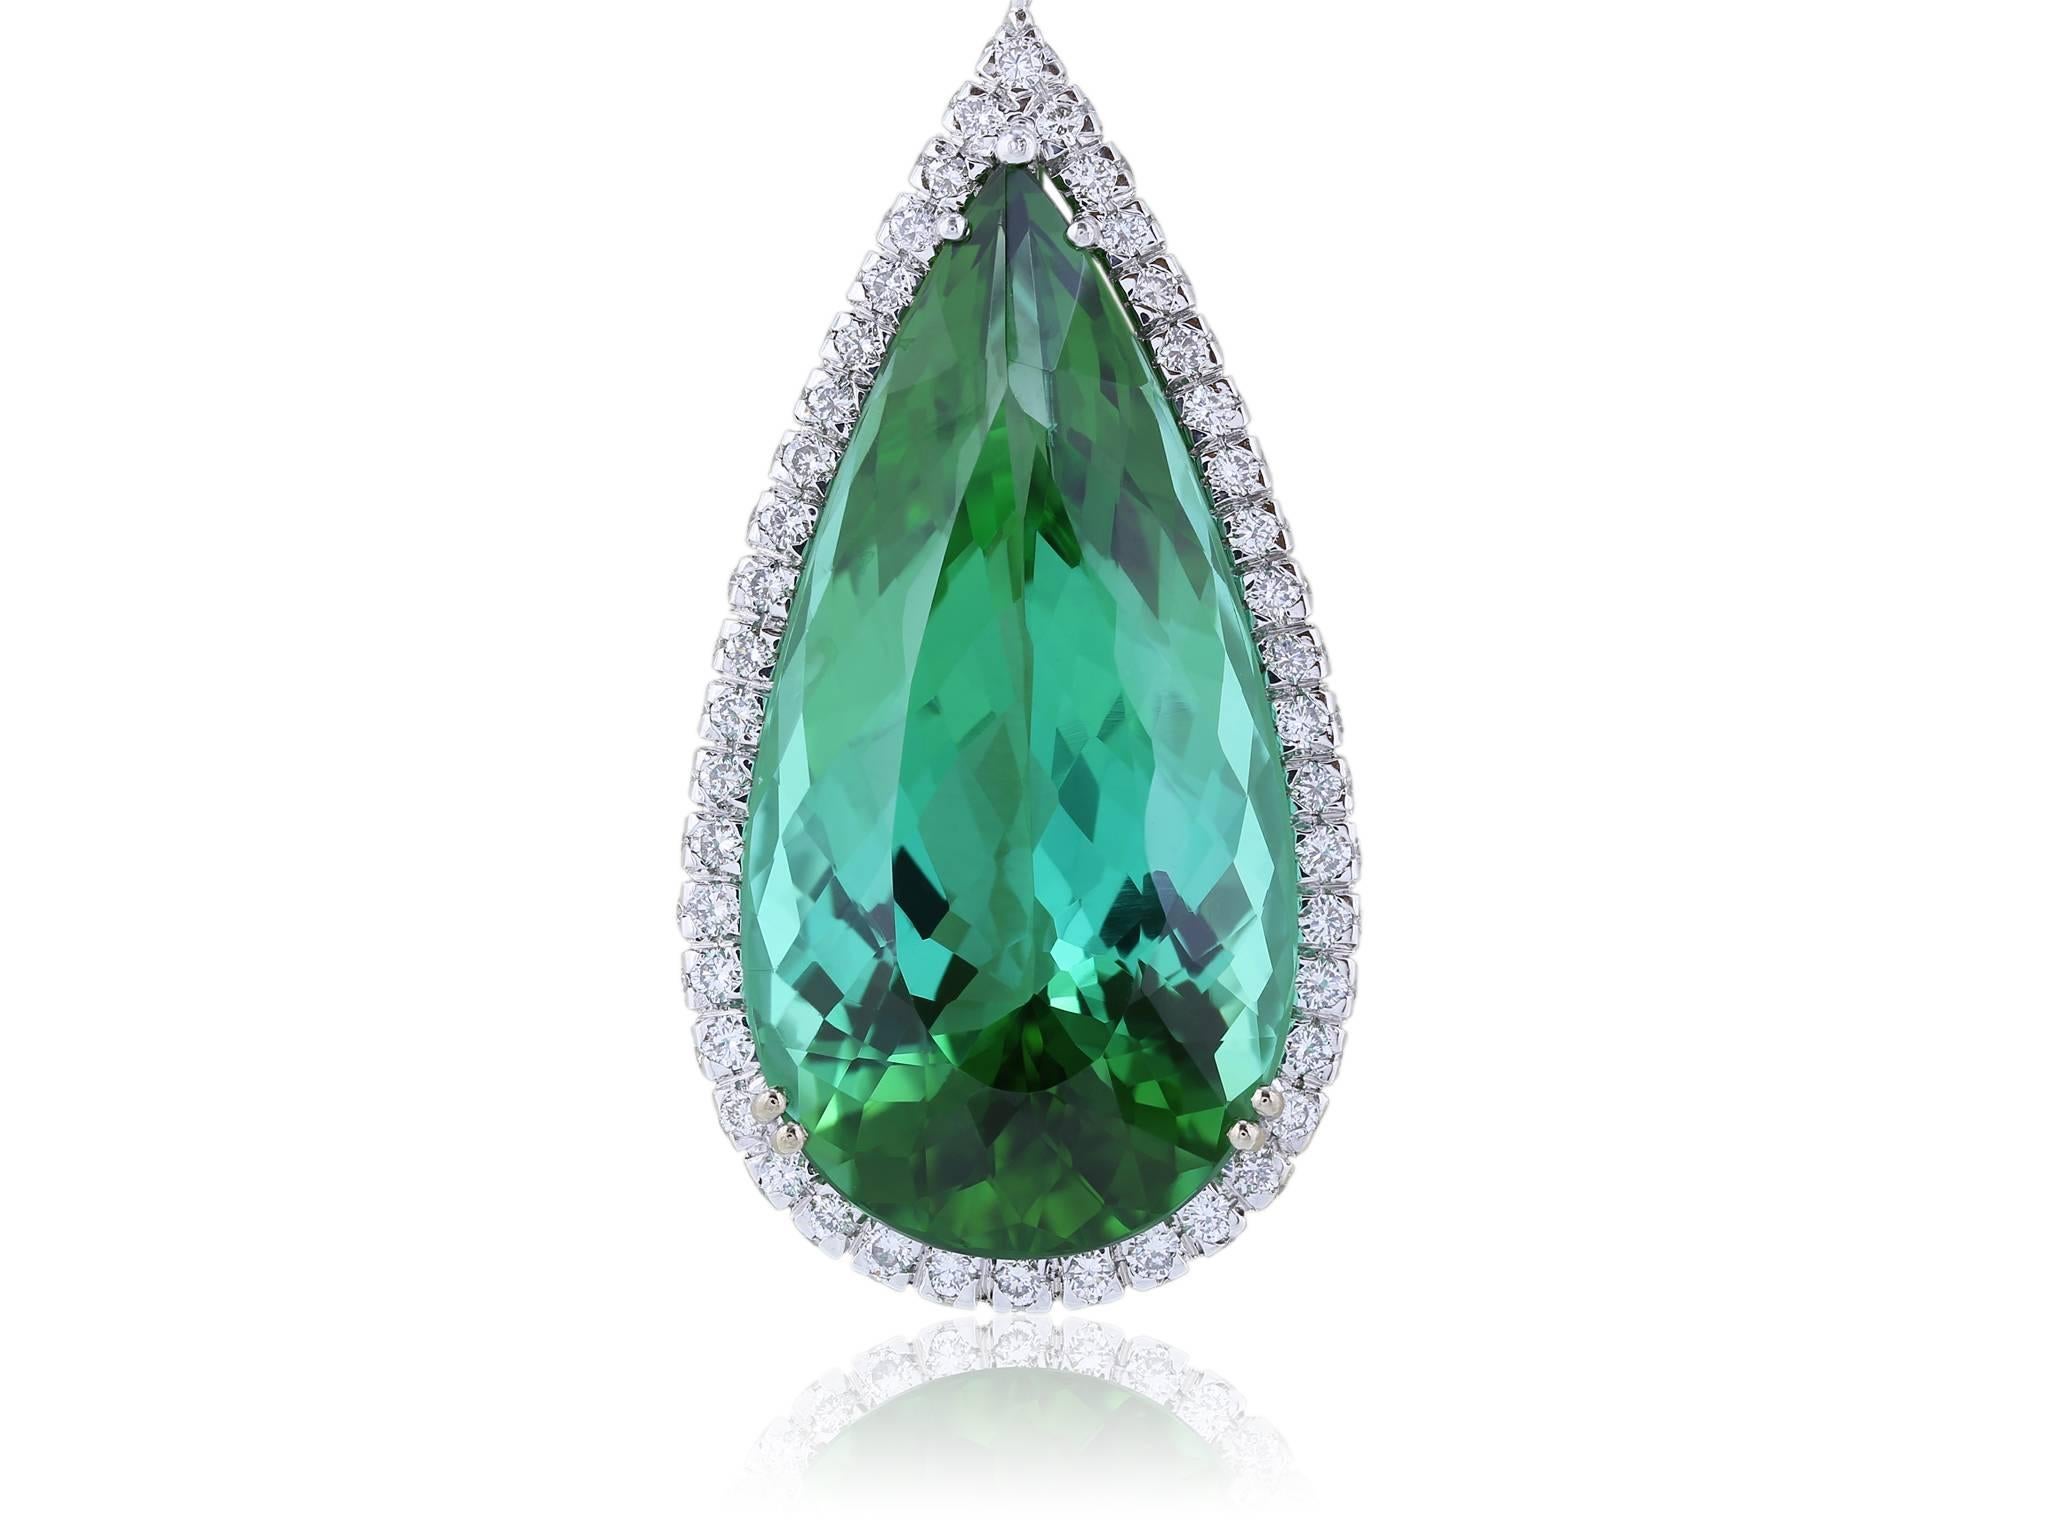 Pendant with pear shaped green tourmaline stone weighing 37.35 carats surrounded by round brilliant diamonds in a halo setting weighing 3.95 carats on a handmade 18 karat white gold chain featuring 2 marquise cut diamonds weighing 1.47 carats and 17